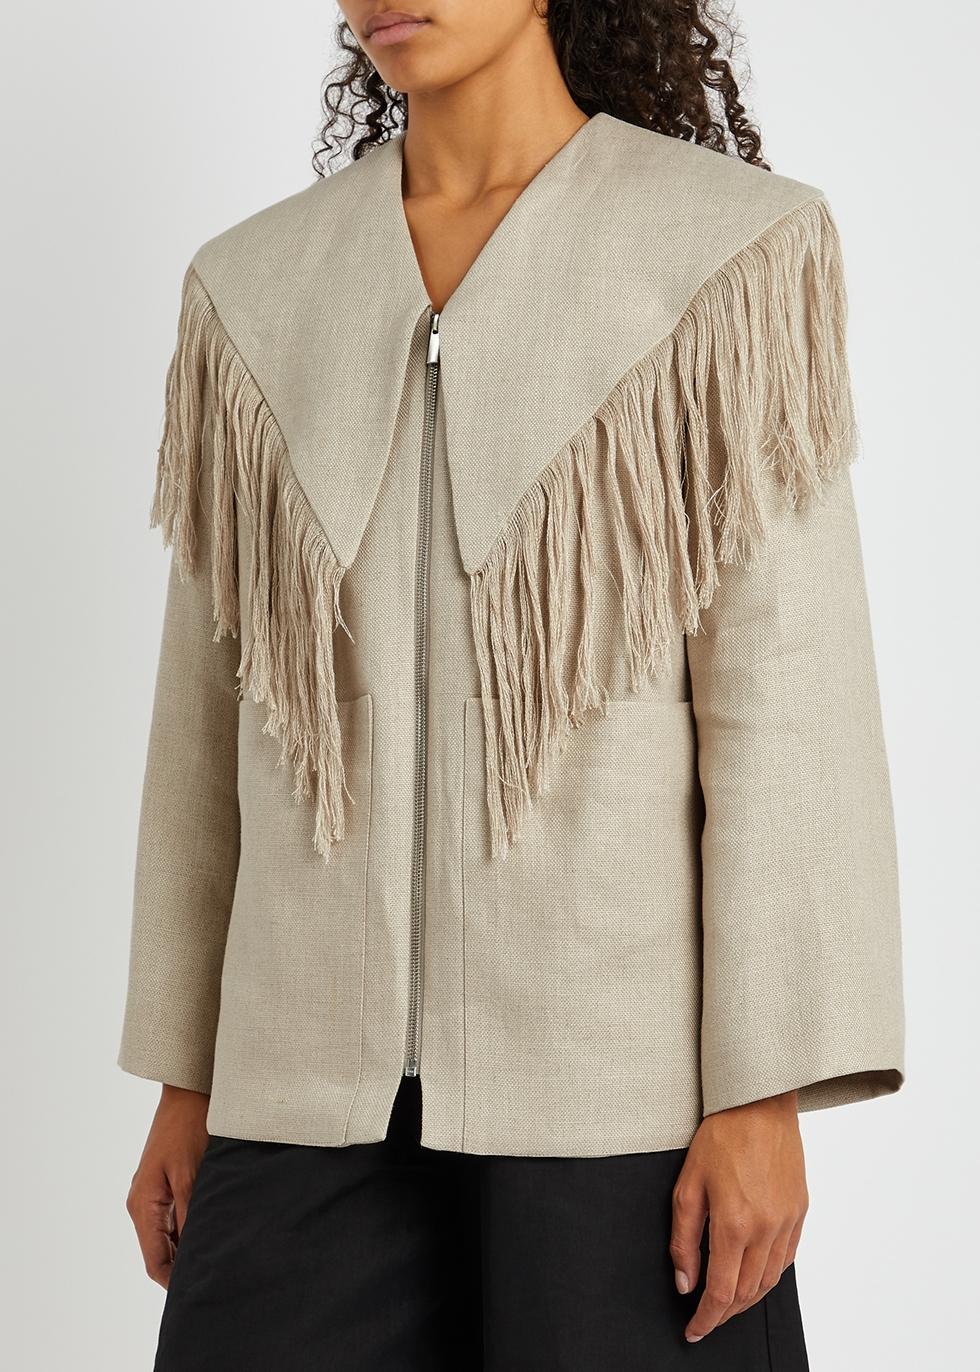 By Malene Birger Allies Sand Fringed Linen Jacket in Natural |